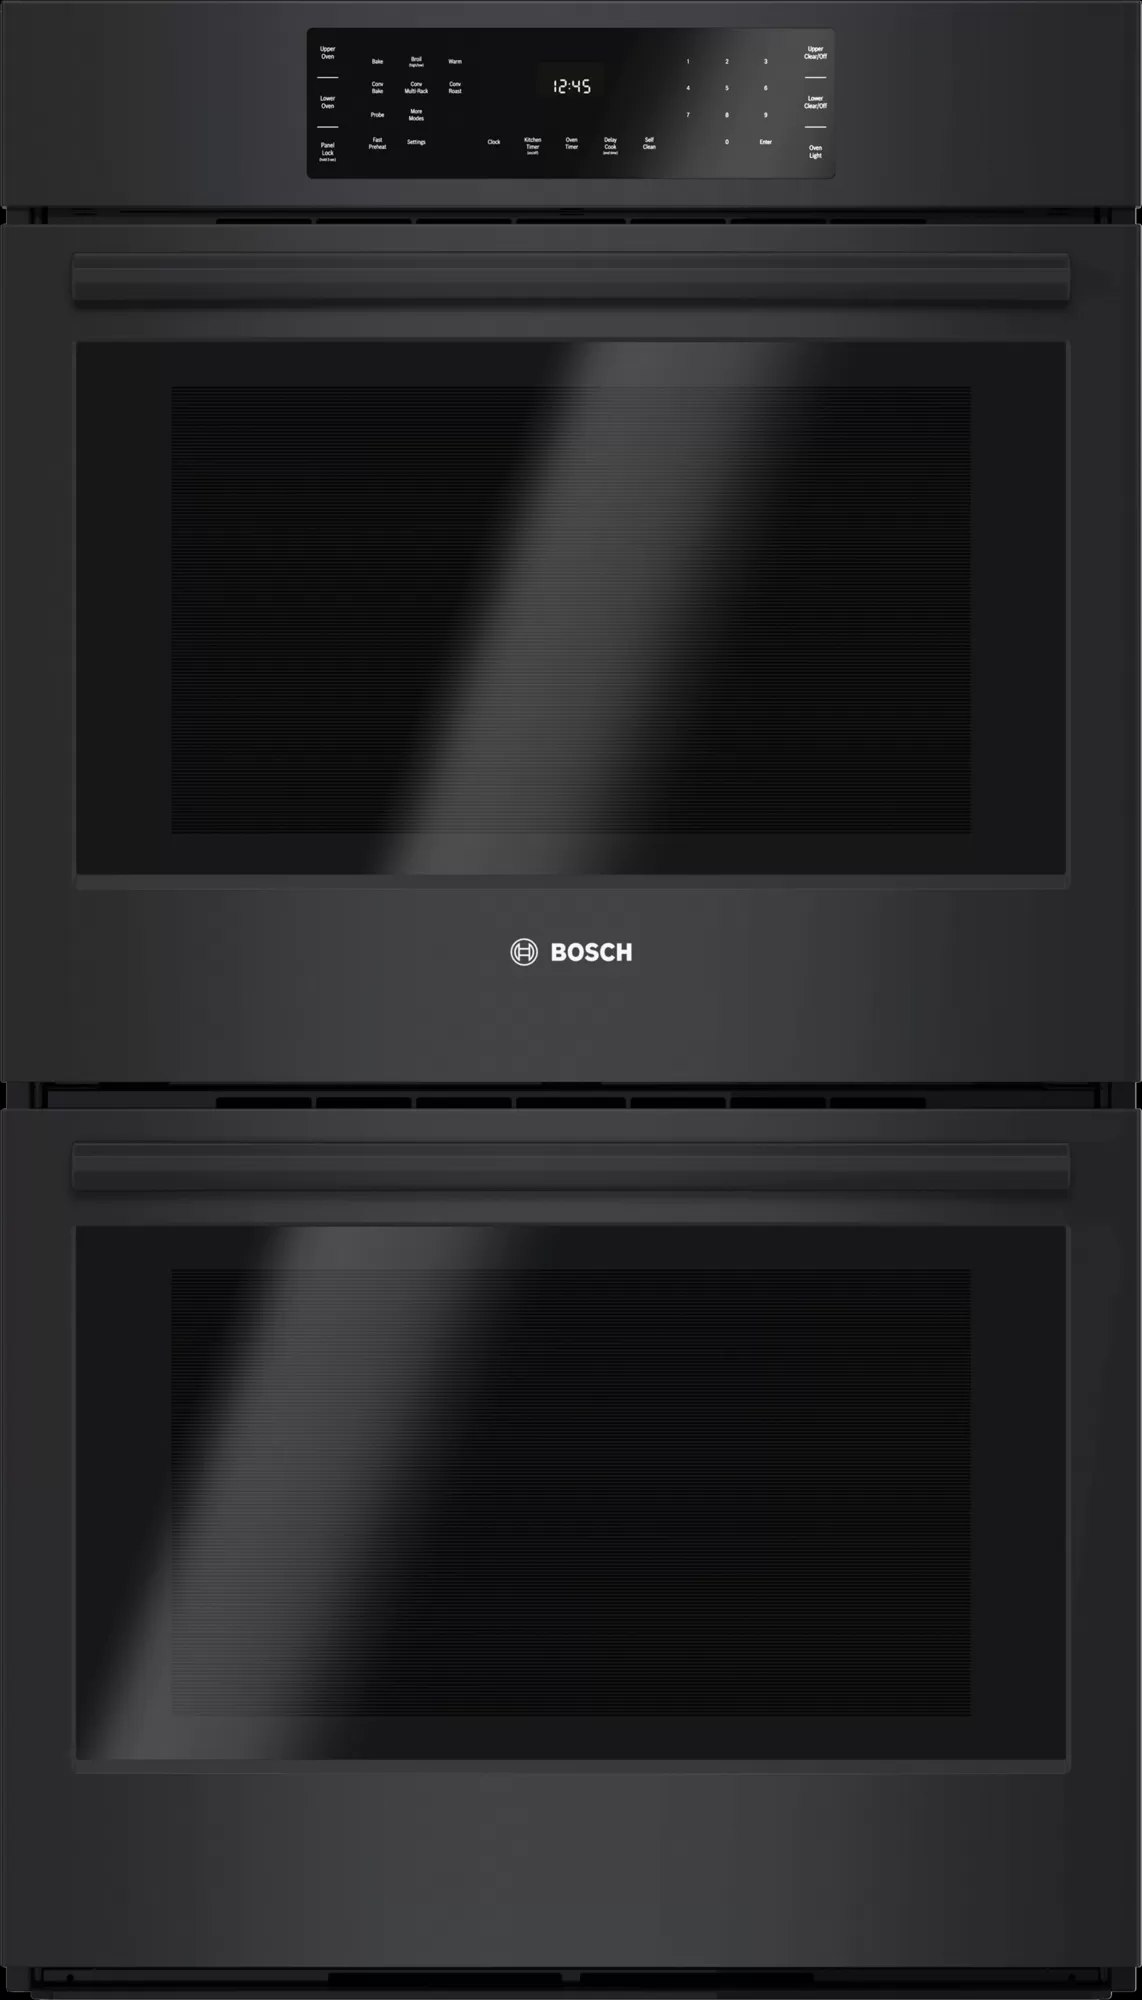 Bosch 800 Series 30" Black Electric Built In Double Oven-HBL8661UC